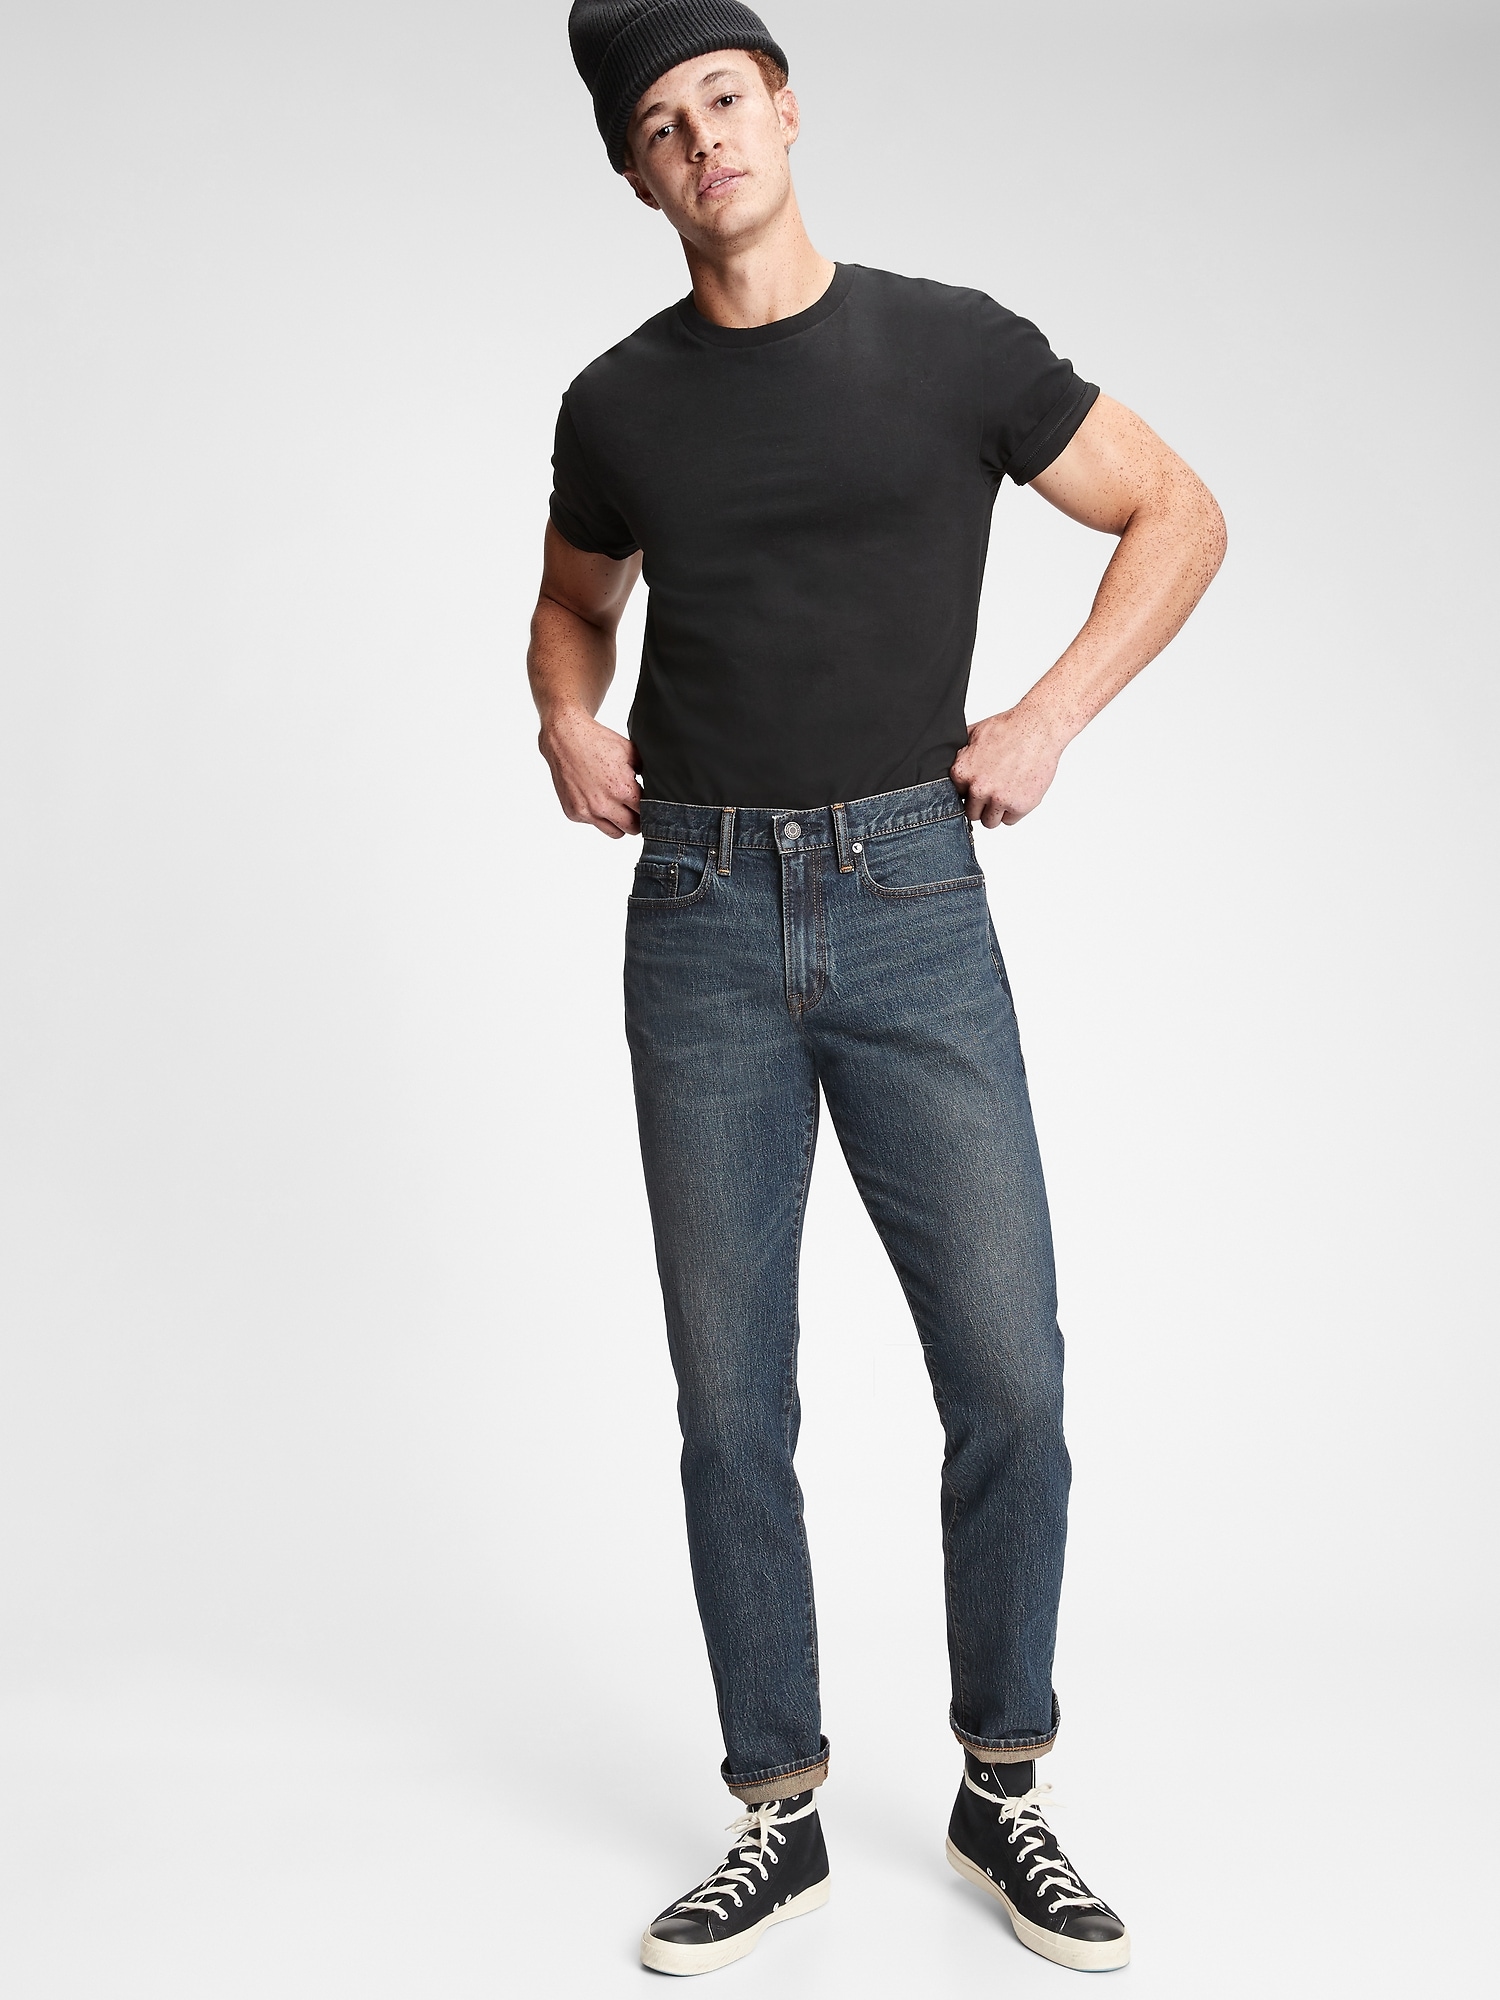 gap jeans athletic fit with gapflex